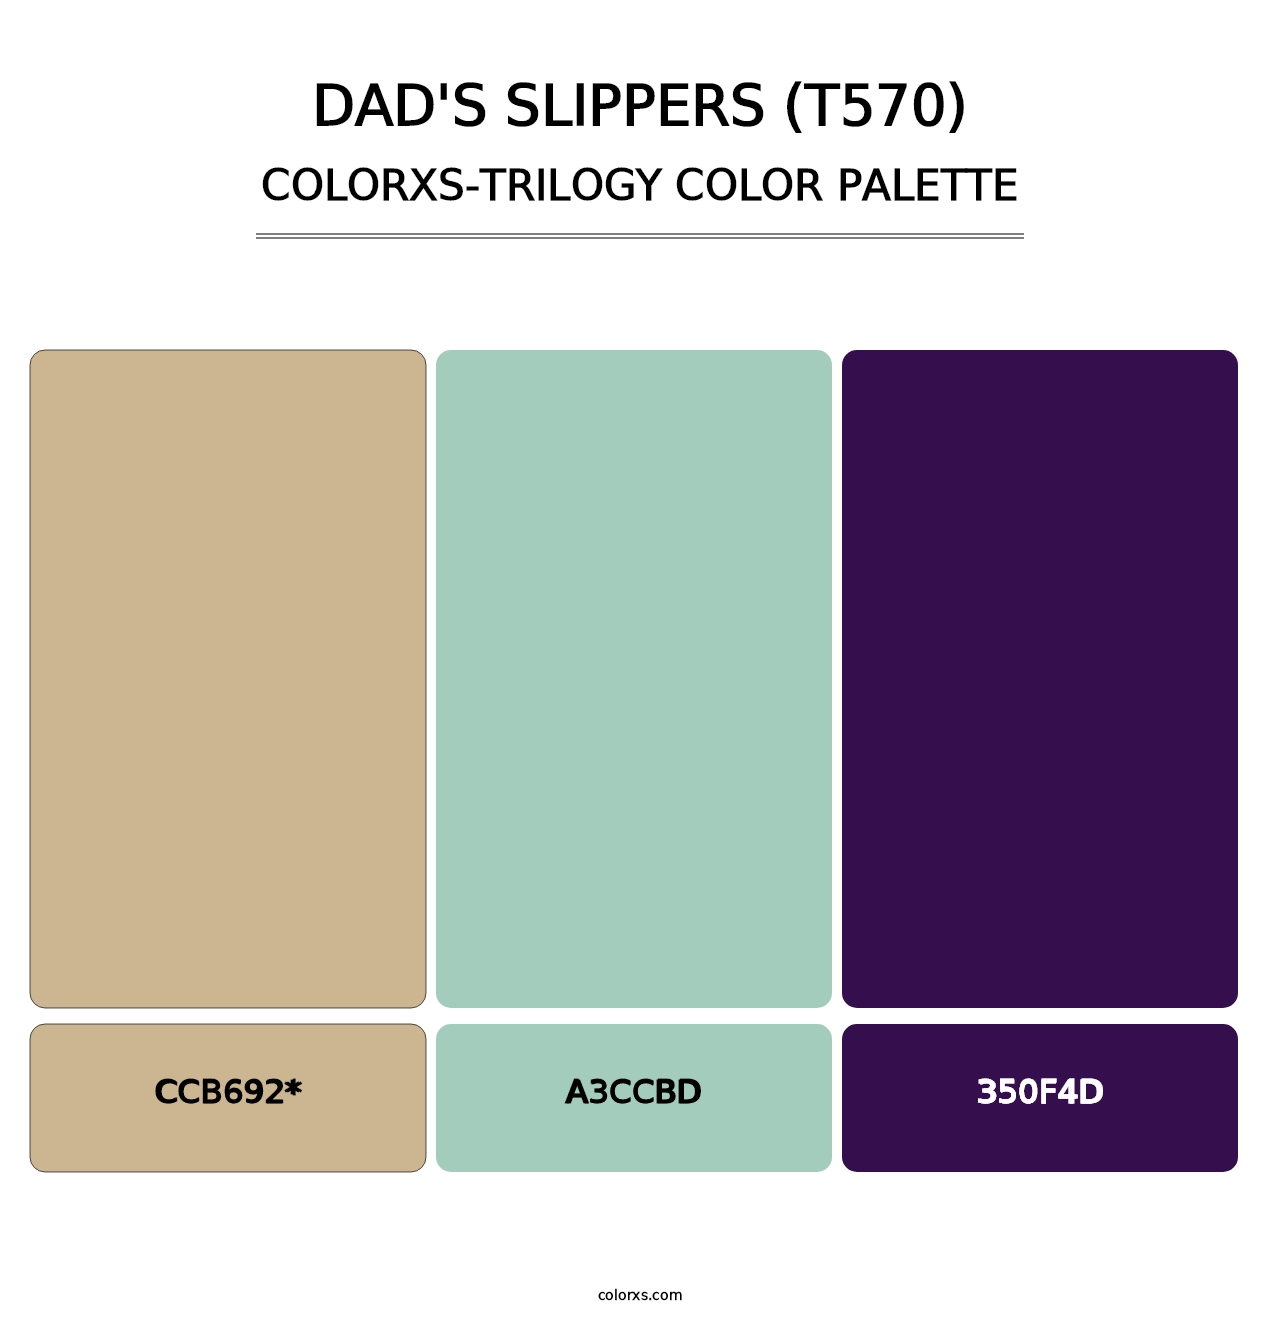 Dad's Slippers (T570) - Colorxs Trilogy Palette